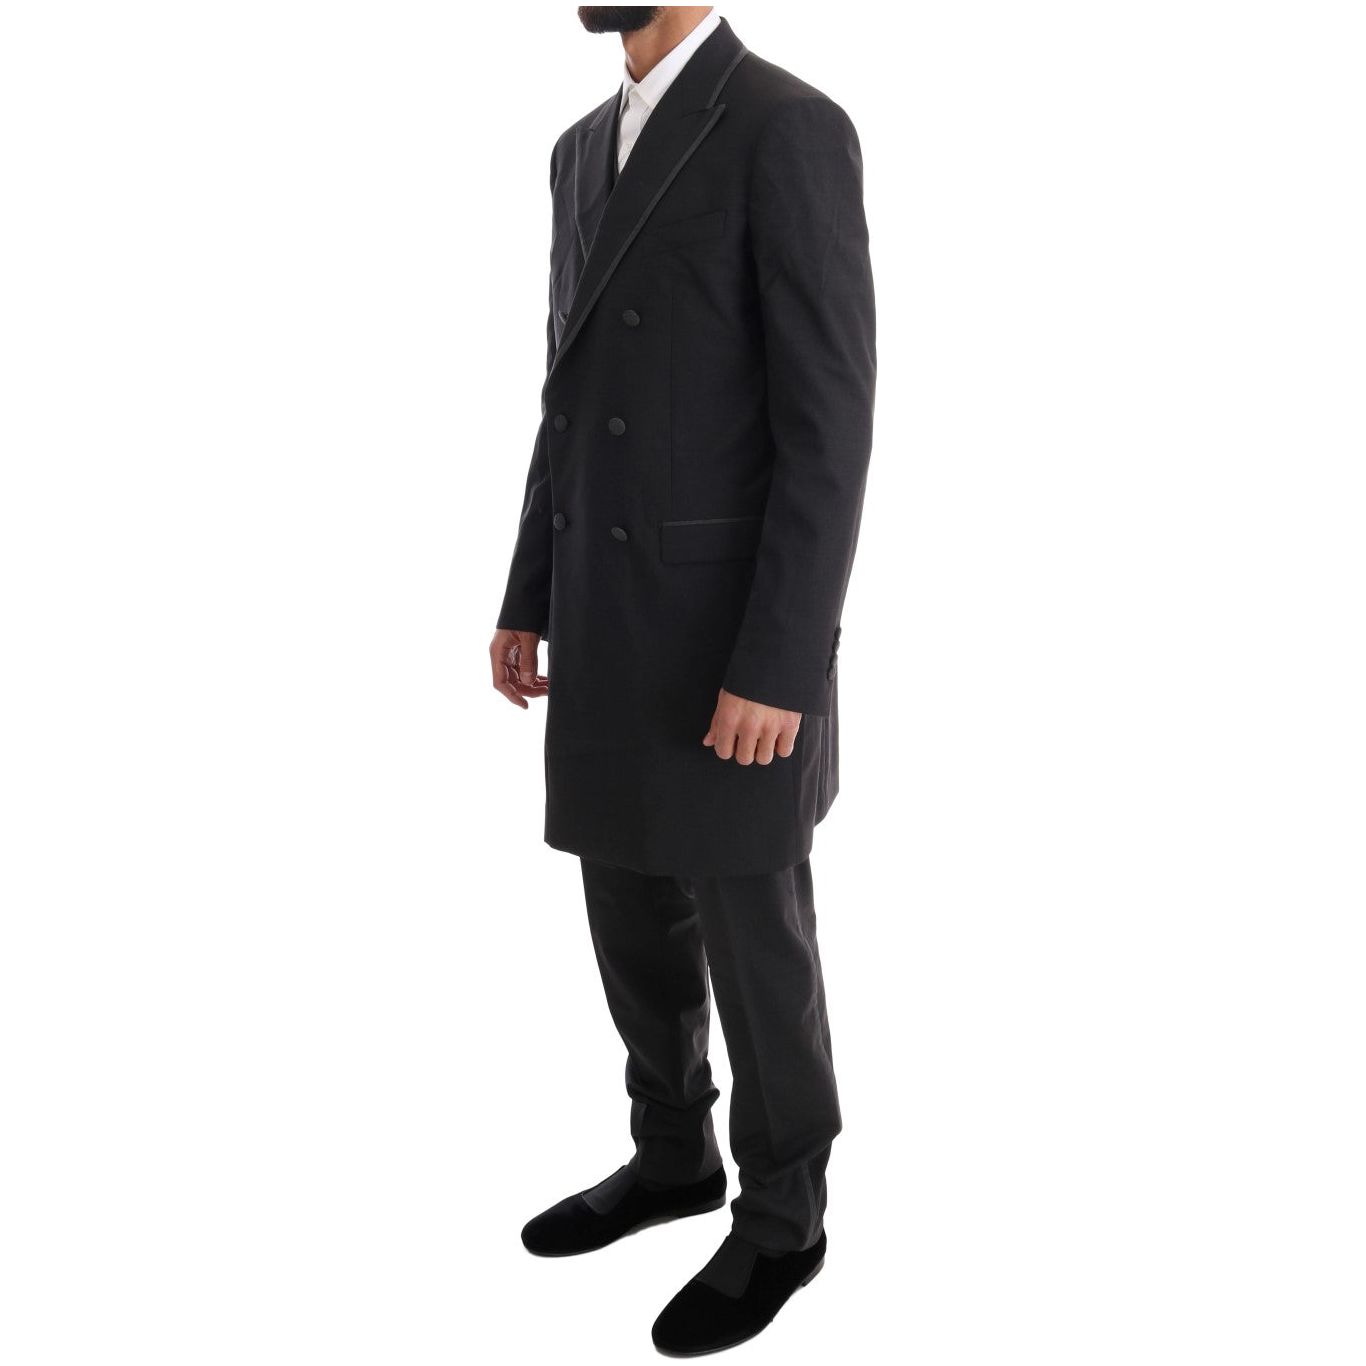 Dolce & Gabbana Elegant Gray Double Breasted Wool Suit gray-wool-stretch-3-piece-two-button-suit-1 Suit 460822-gray-wool-stretch-3-piece-two-button-suit-2-1.jpg